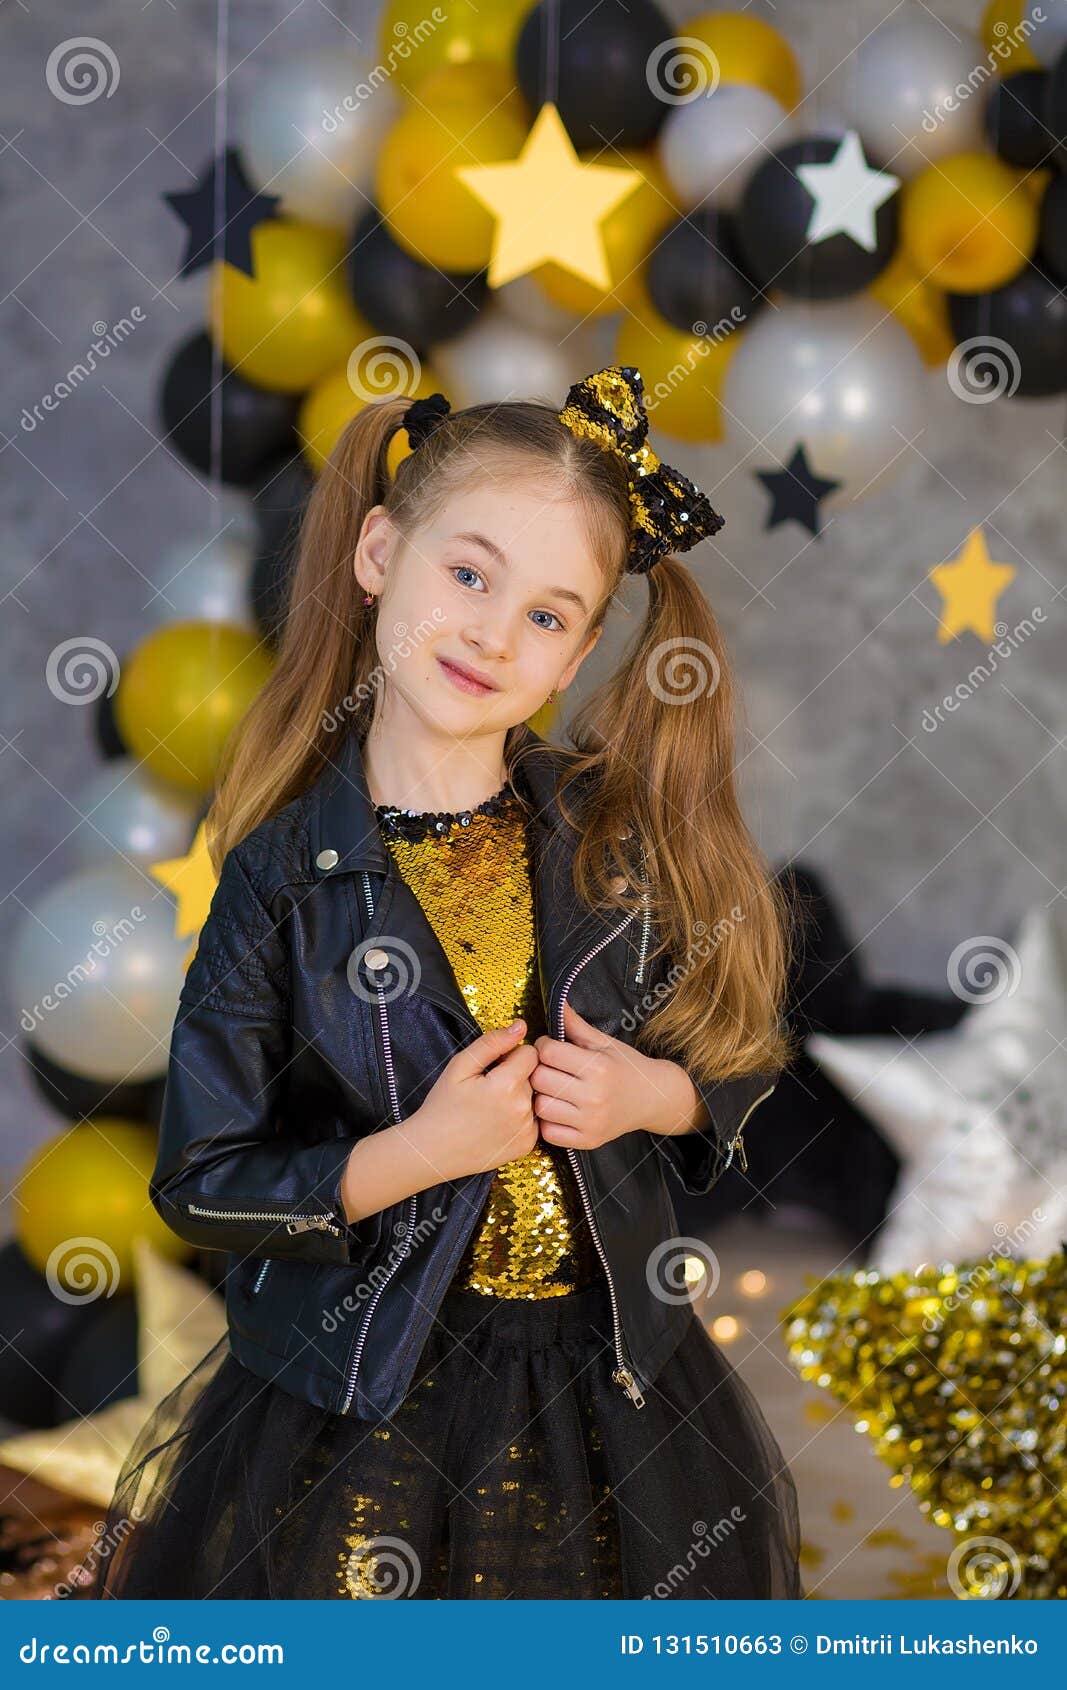 Movie Super Star Girl Model Posing In Studio Shoot With Golden Star And Colorful Baloons Wearing Stylish Gold Airy Dress With Stock Image Image Of Dolly Cover